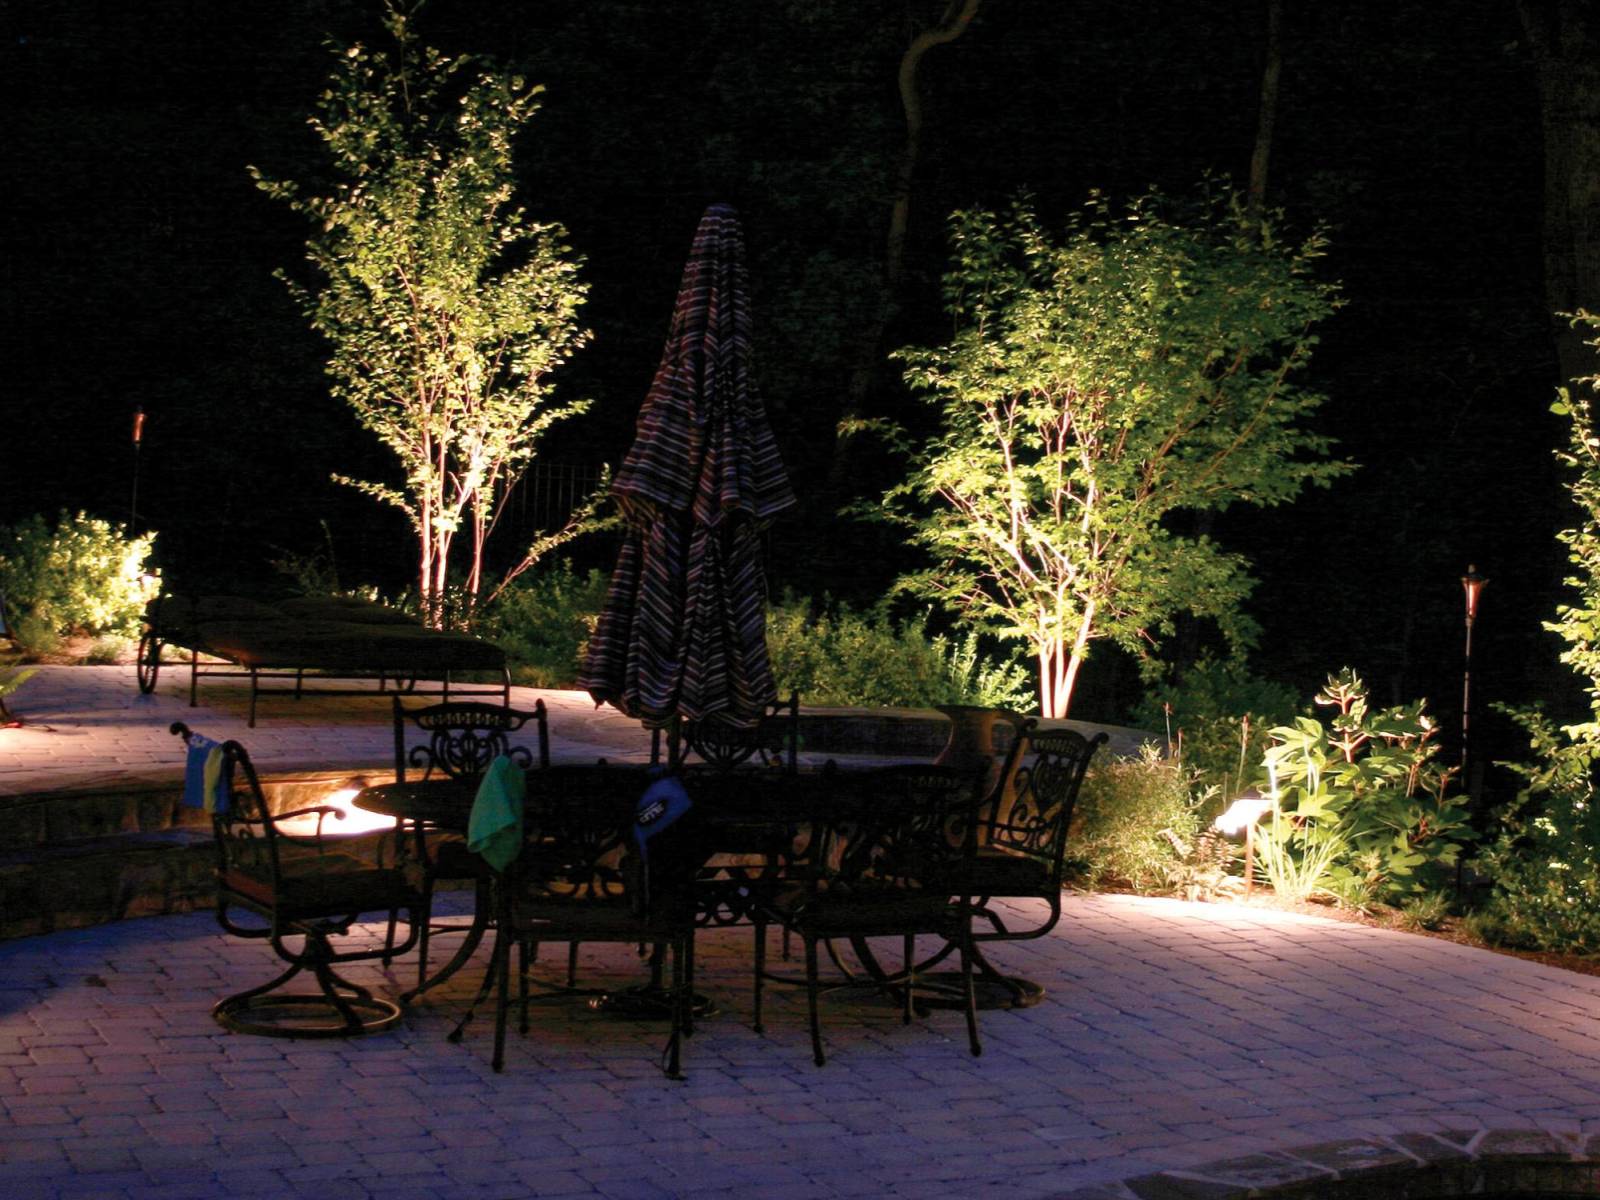 26 Most Beautiful Patio Lighting Ideas That Inspire You